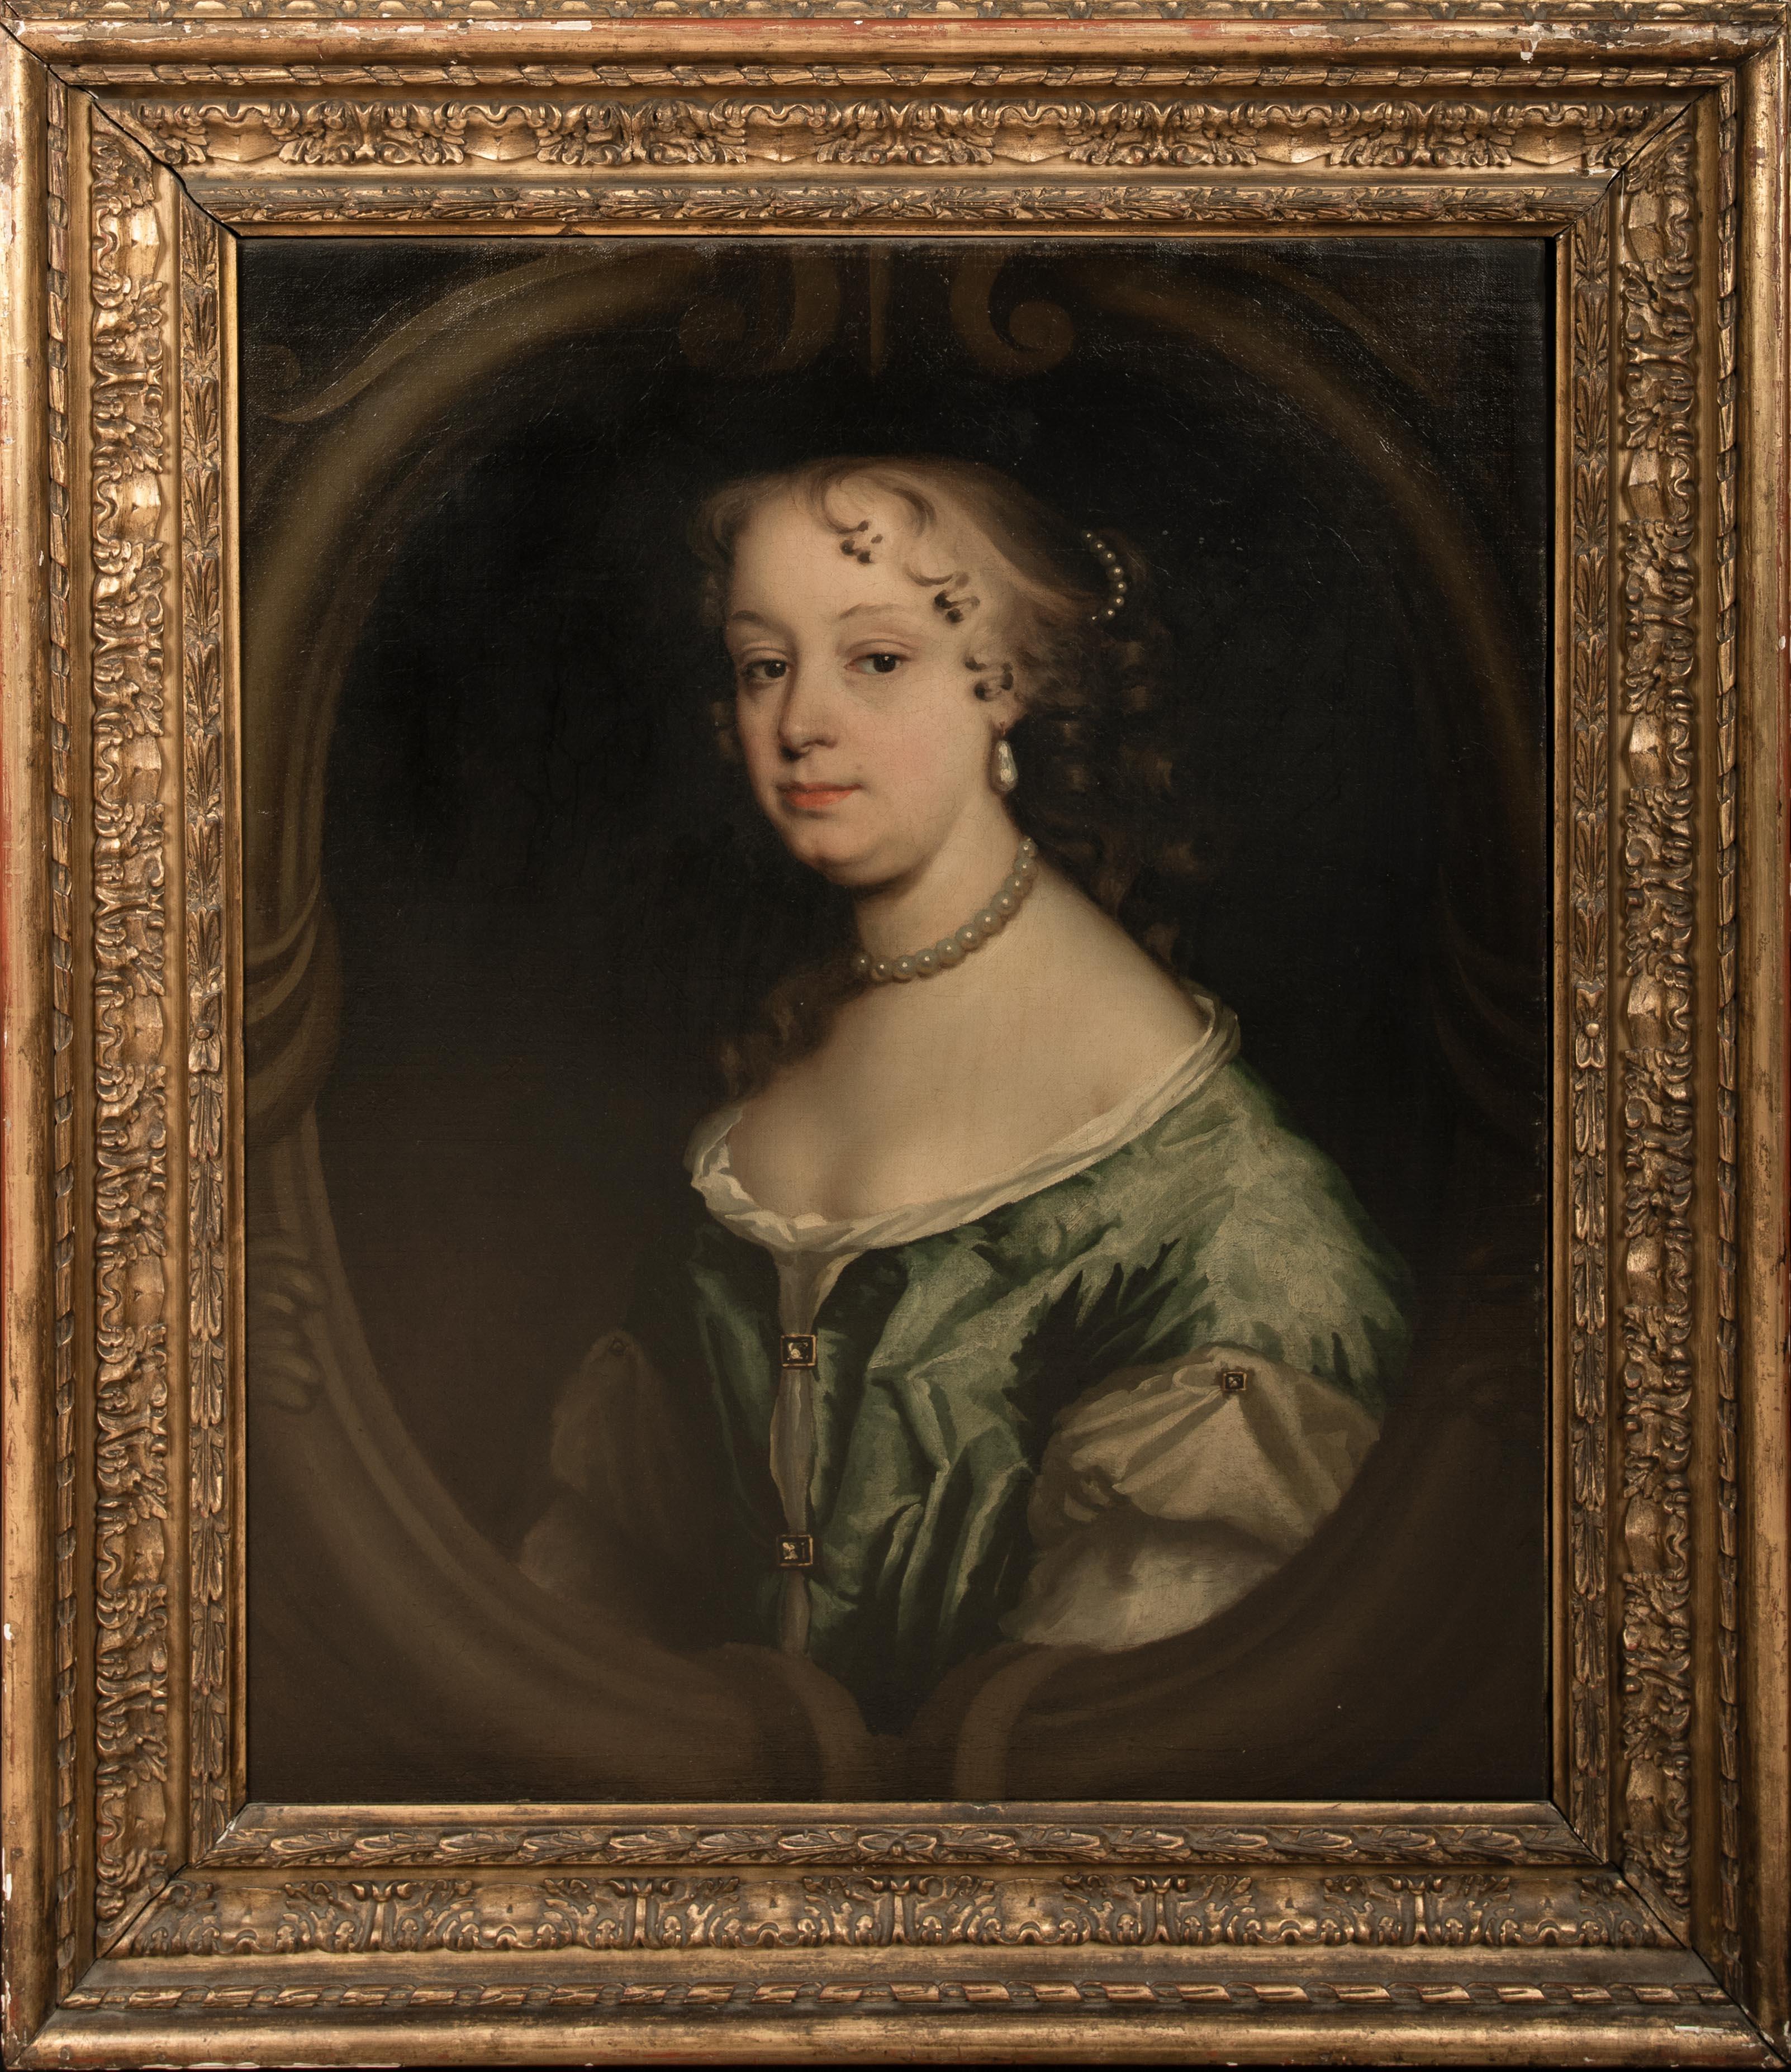 Portrait Of Mary Wither Of Andwell, 17th Century

Jacob Huysmans (1633–1696) to $750,000

Large 17th Century portrait of Mary Wither of Andwell, oil on canvas by Jacob Huysmans. Excellent quality and condition portrait of the young lady wearing a